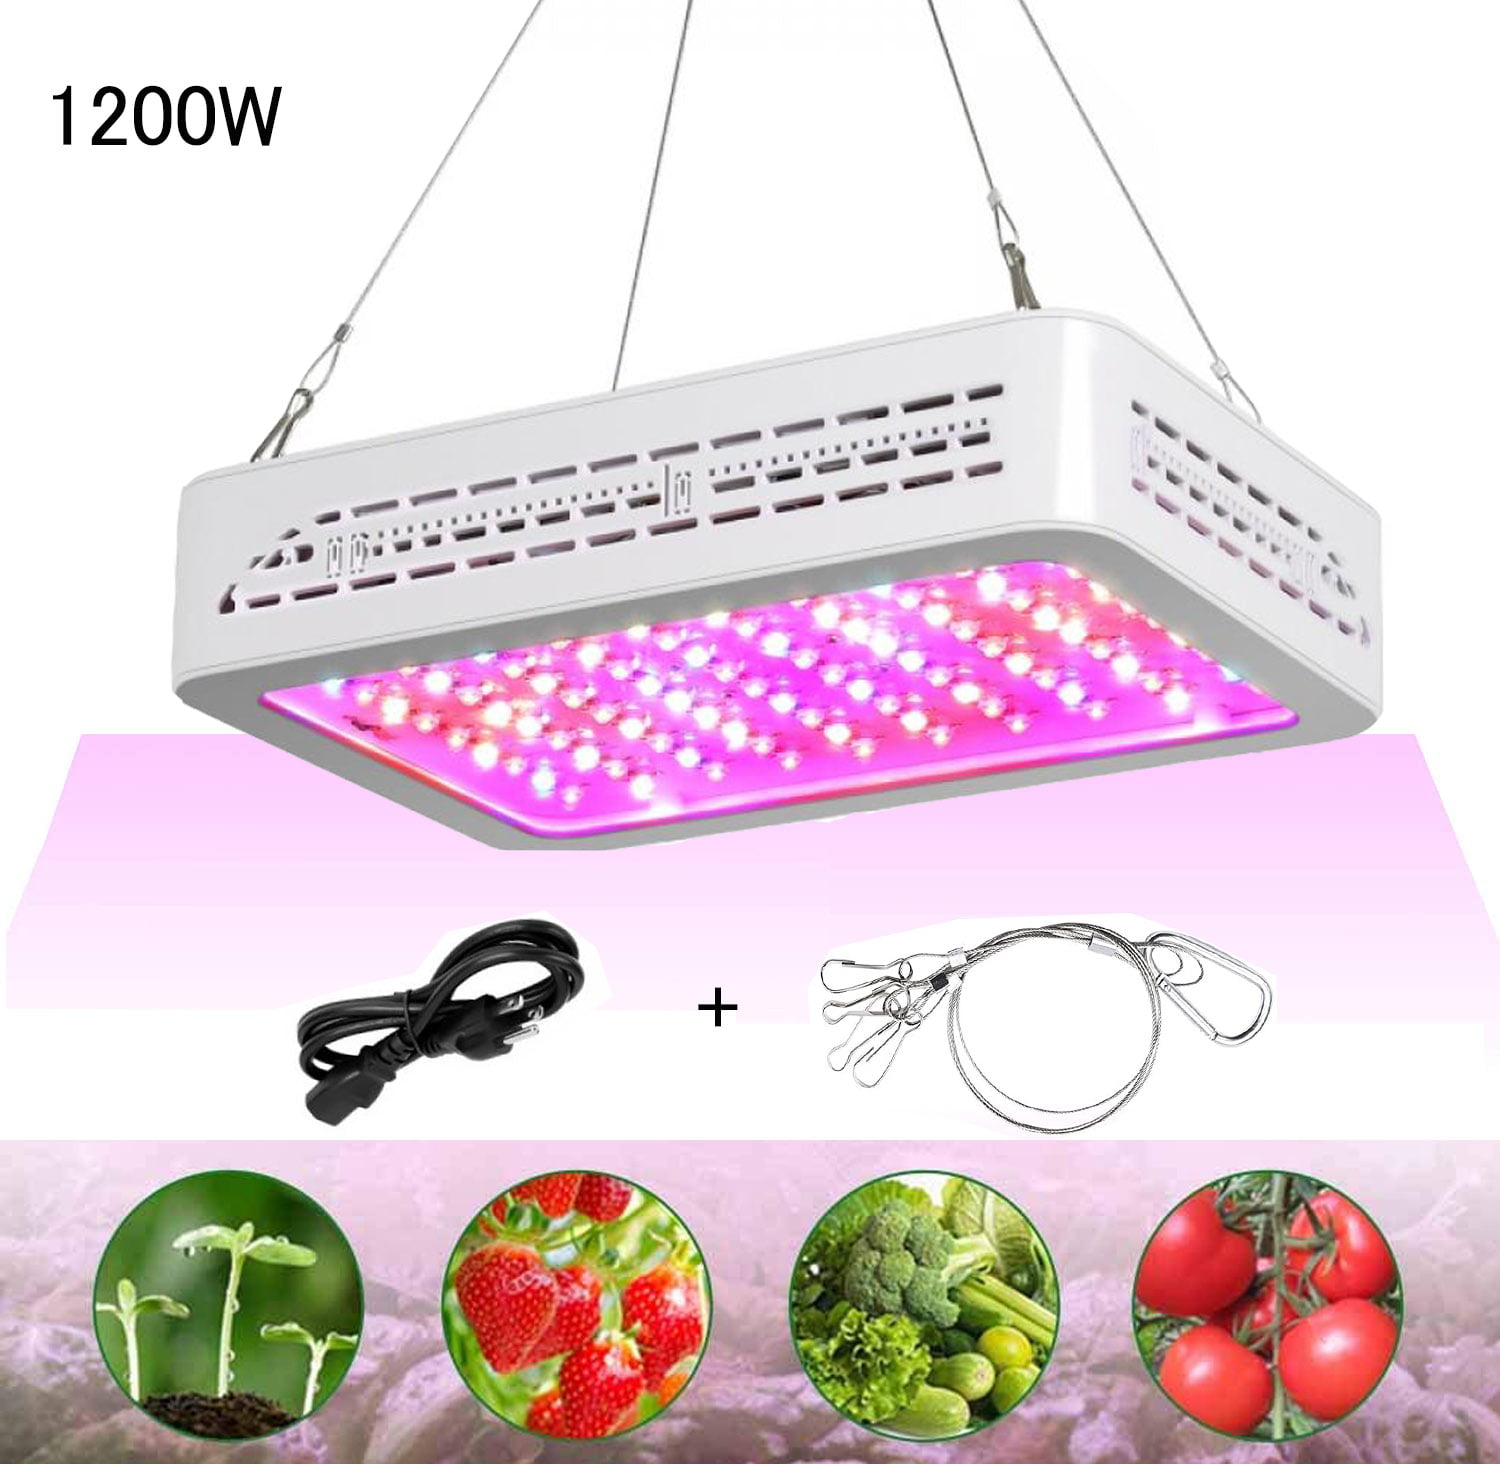 1200W LED Grow Light Full Spectrum Double Switch Chips For Indoor Plant Flower 